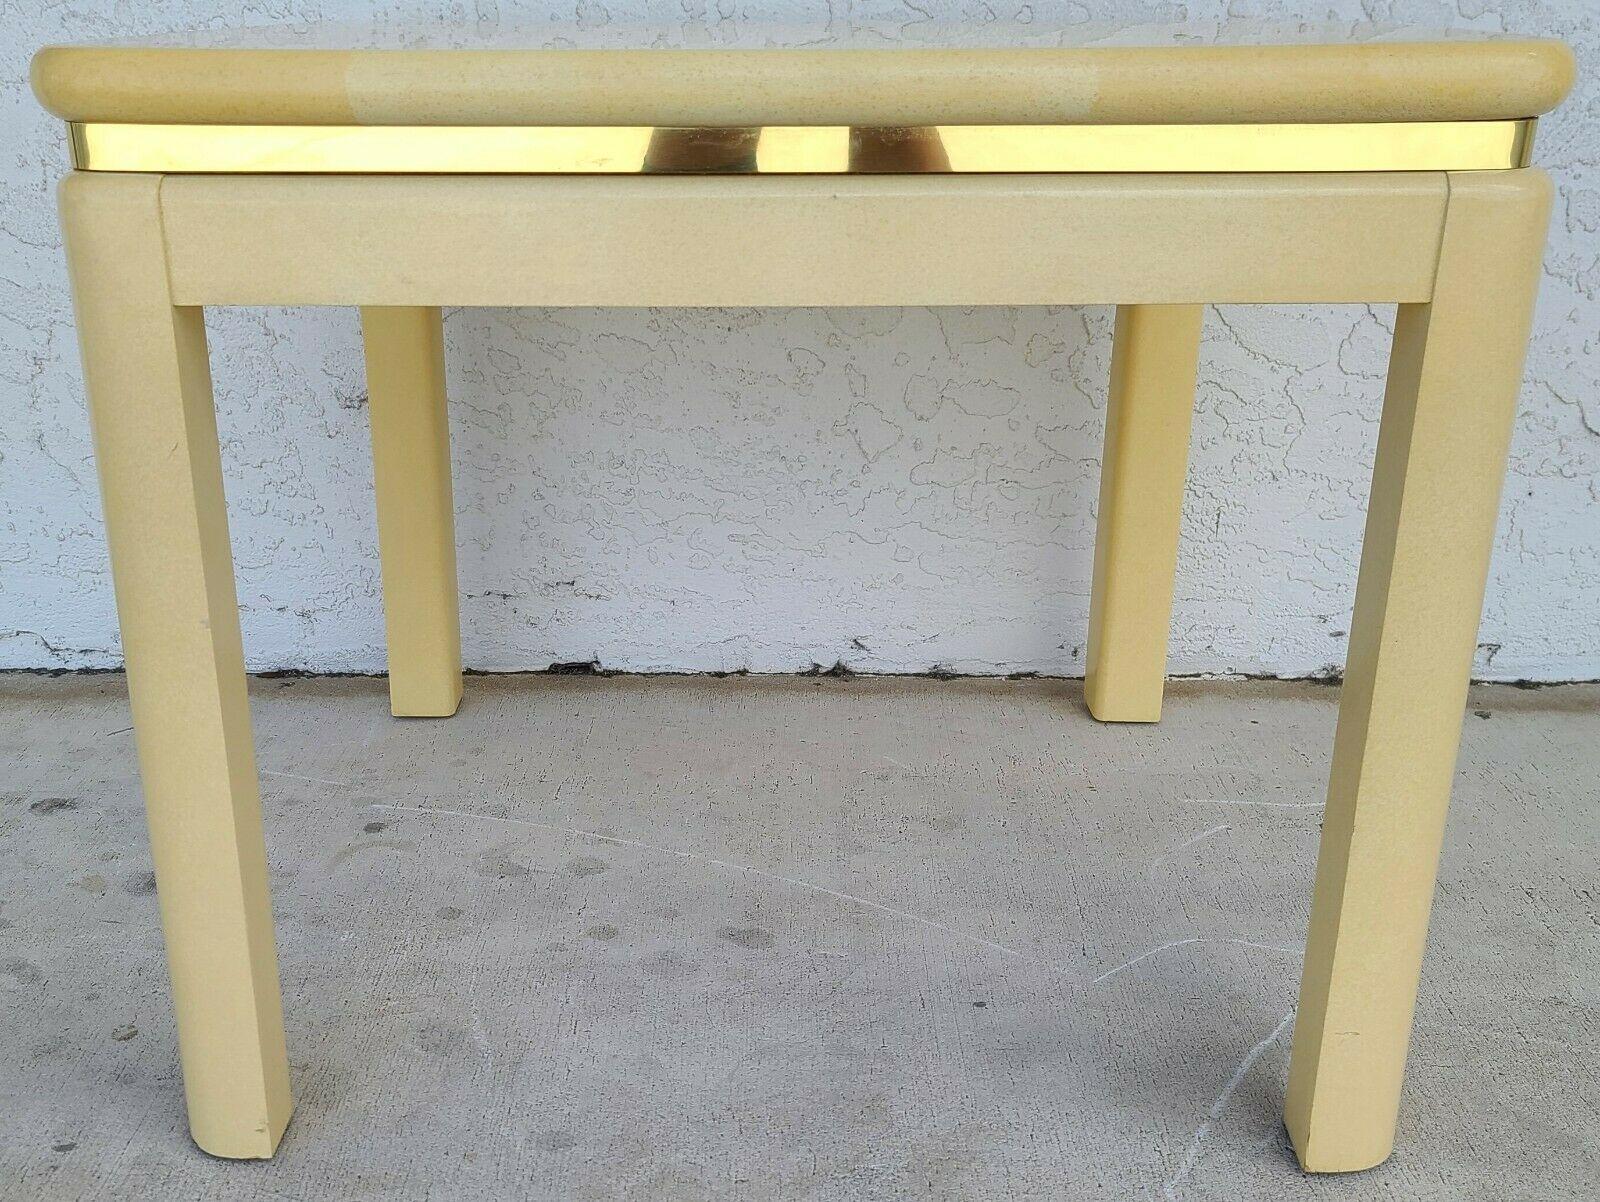 For FULL item description click on CONTINUE READING at the bottom of this page.

Offering one of our recent Palm Beach Estate fine furniture acquisitions of a 

1980's Karl Springer style faux lacquered goatskin side table

This listing and price